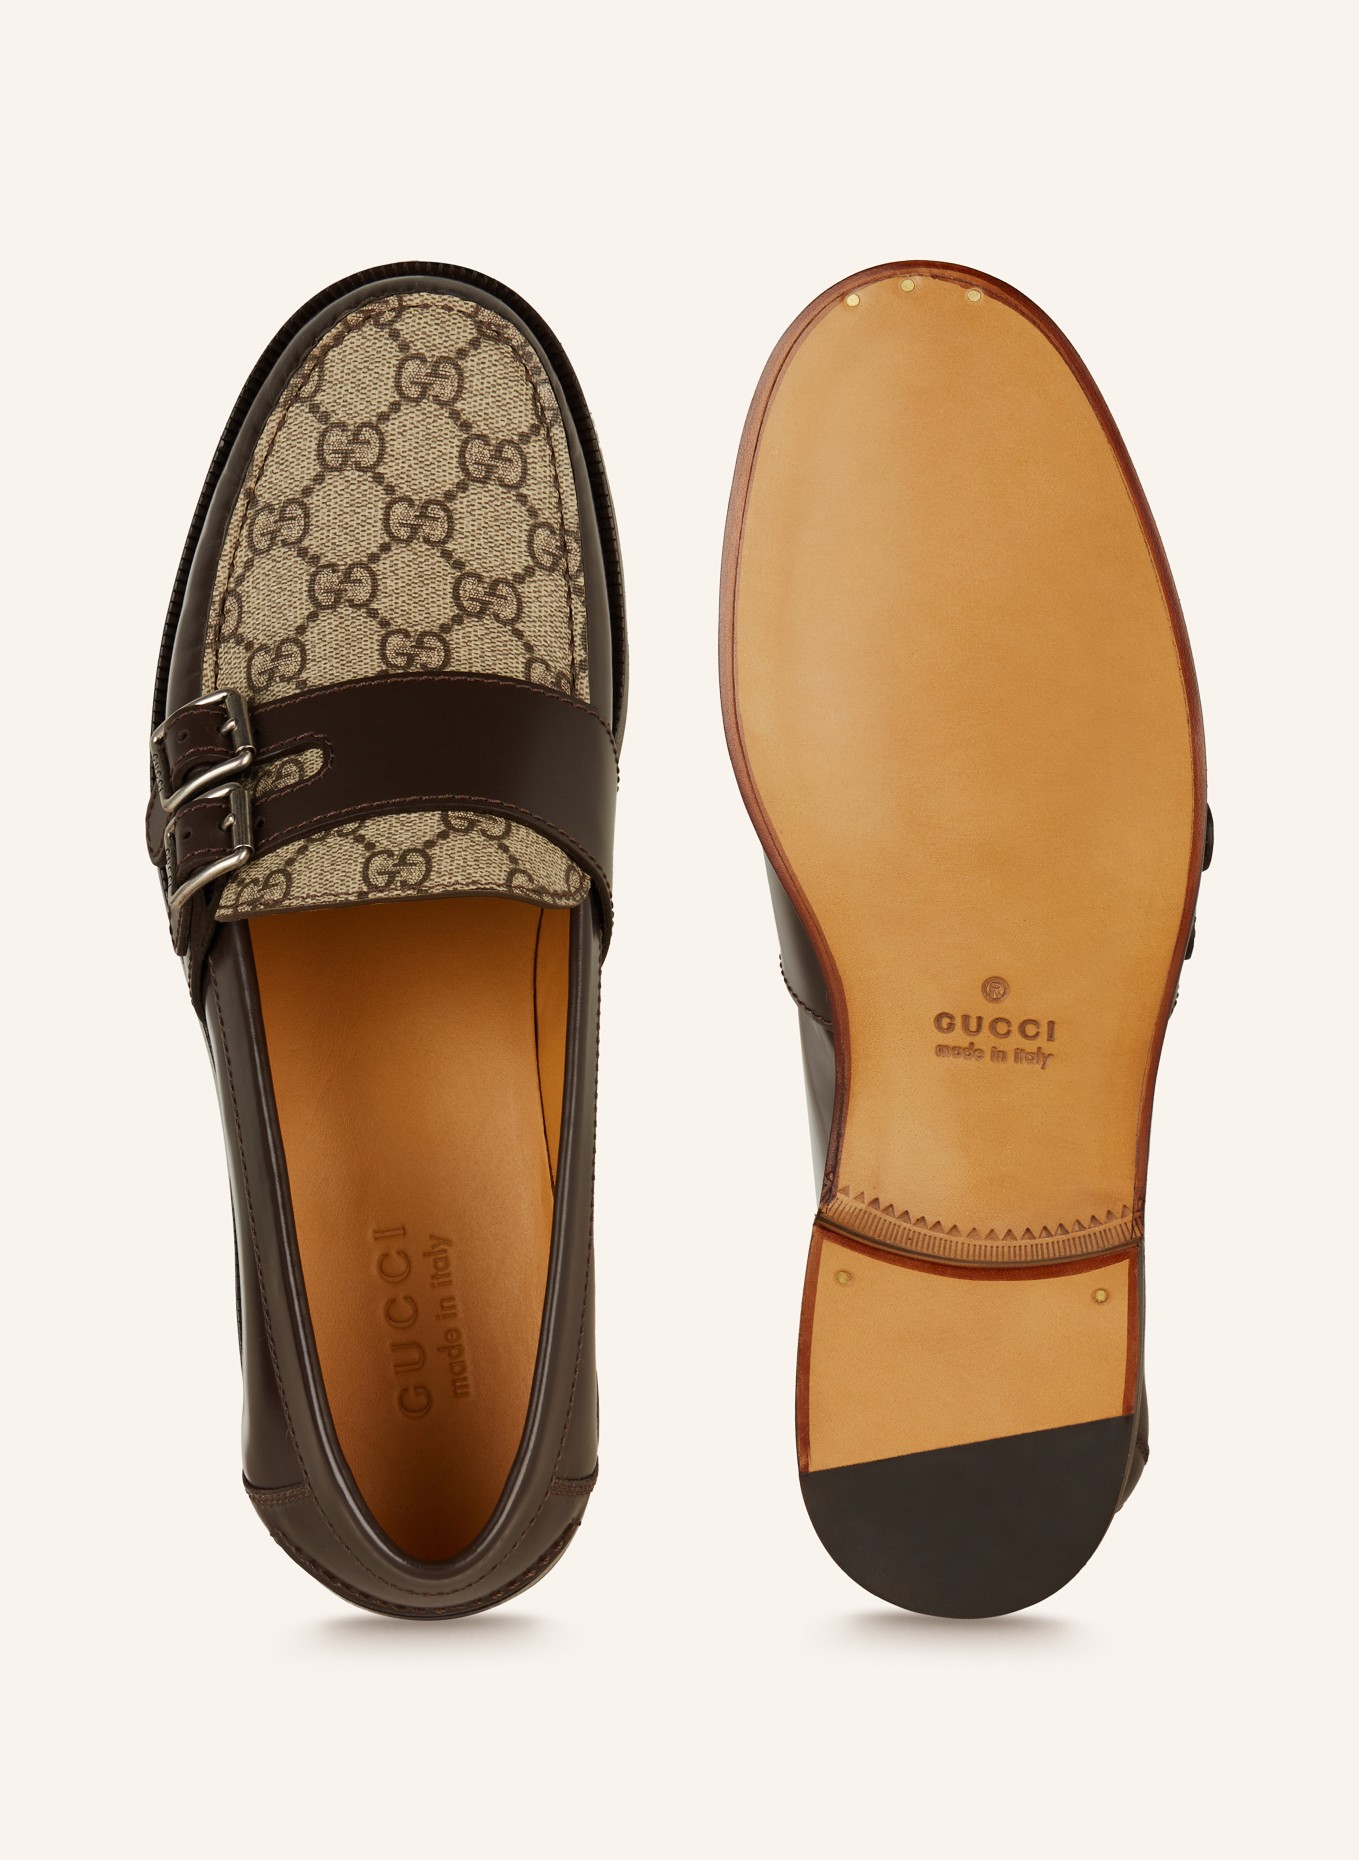 GUCCI Loafers, Color: 2143 BEIGE (Image 5)